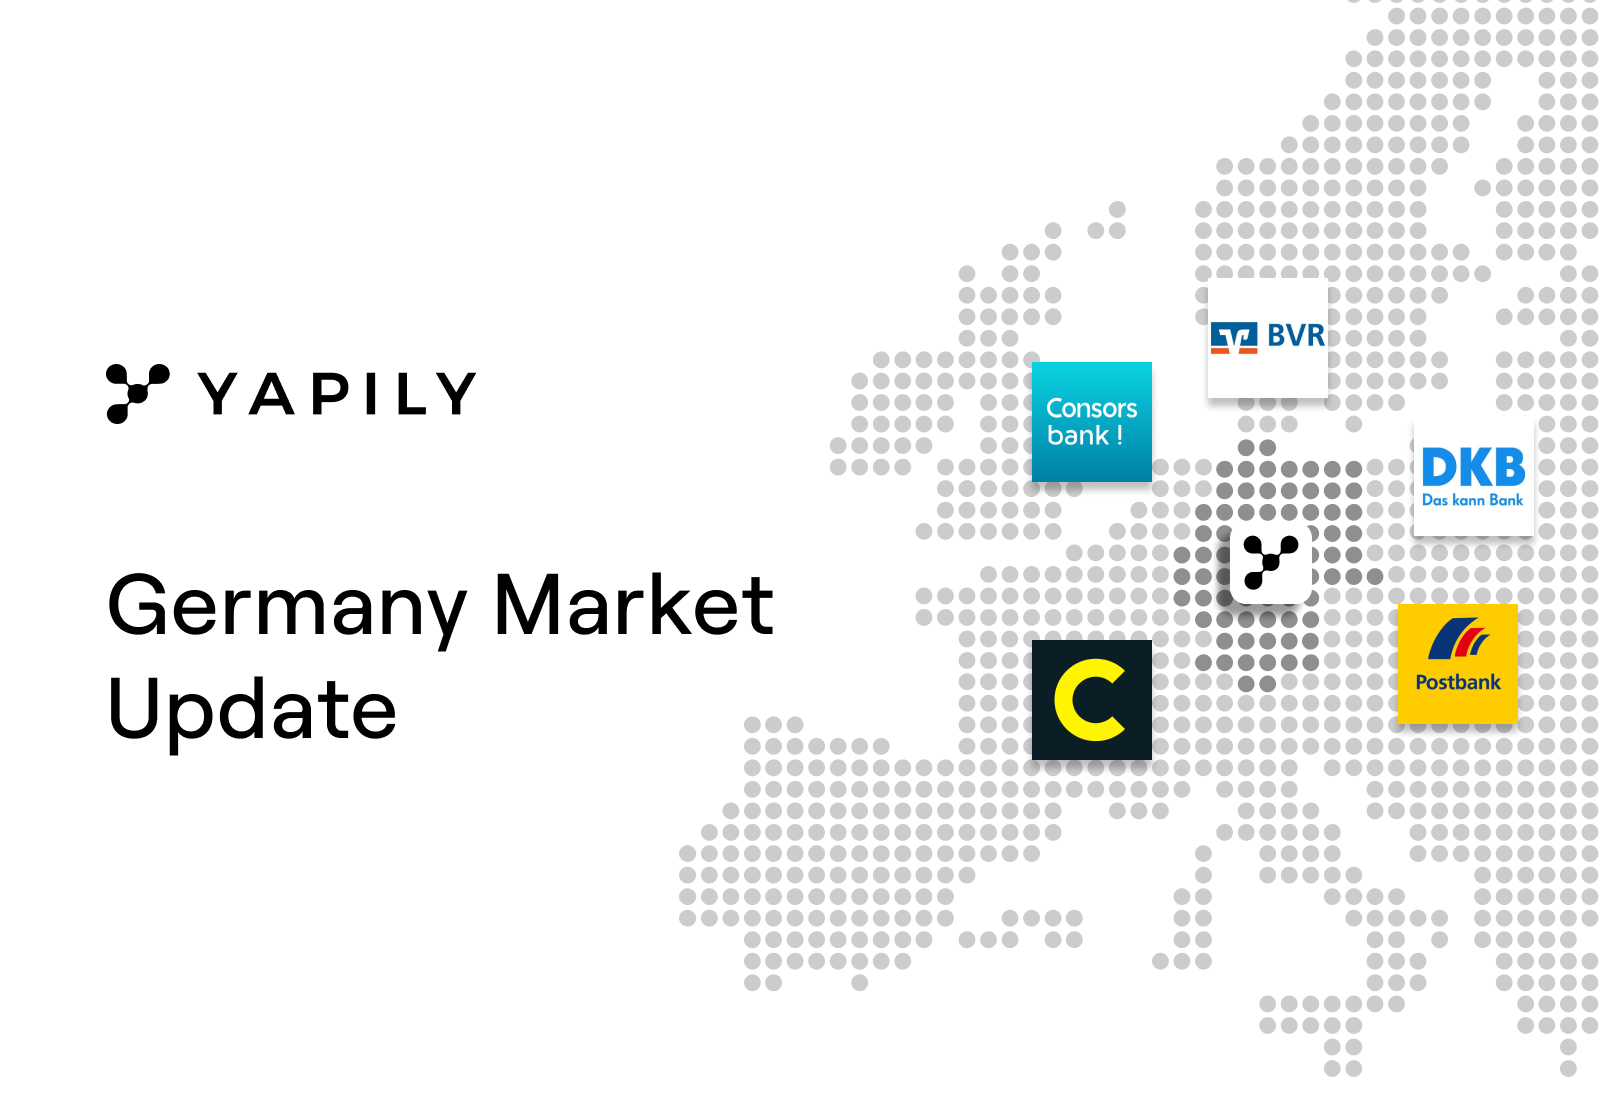 The latest German market update from Yapily. When we initially developed a foothold in the region, we understood the fragmented banking landscape within Germany and we wanted to further expand our coverage to help serve our customers better.